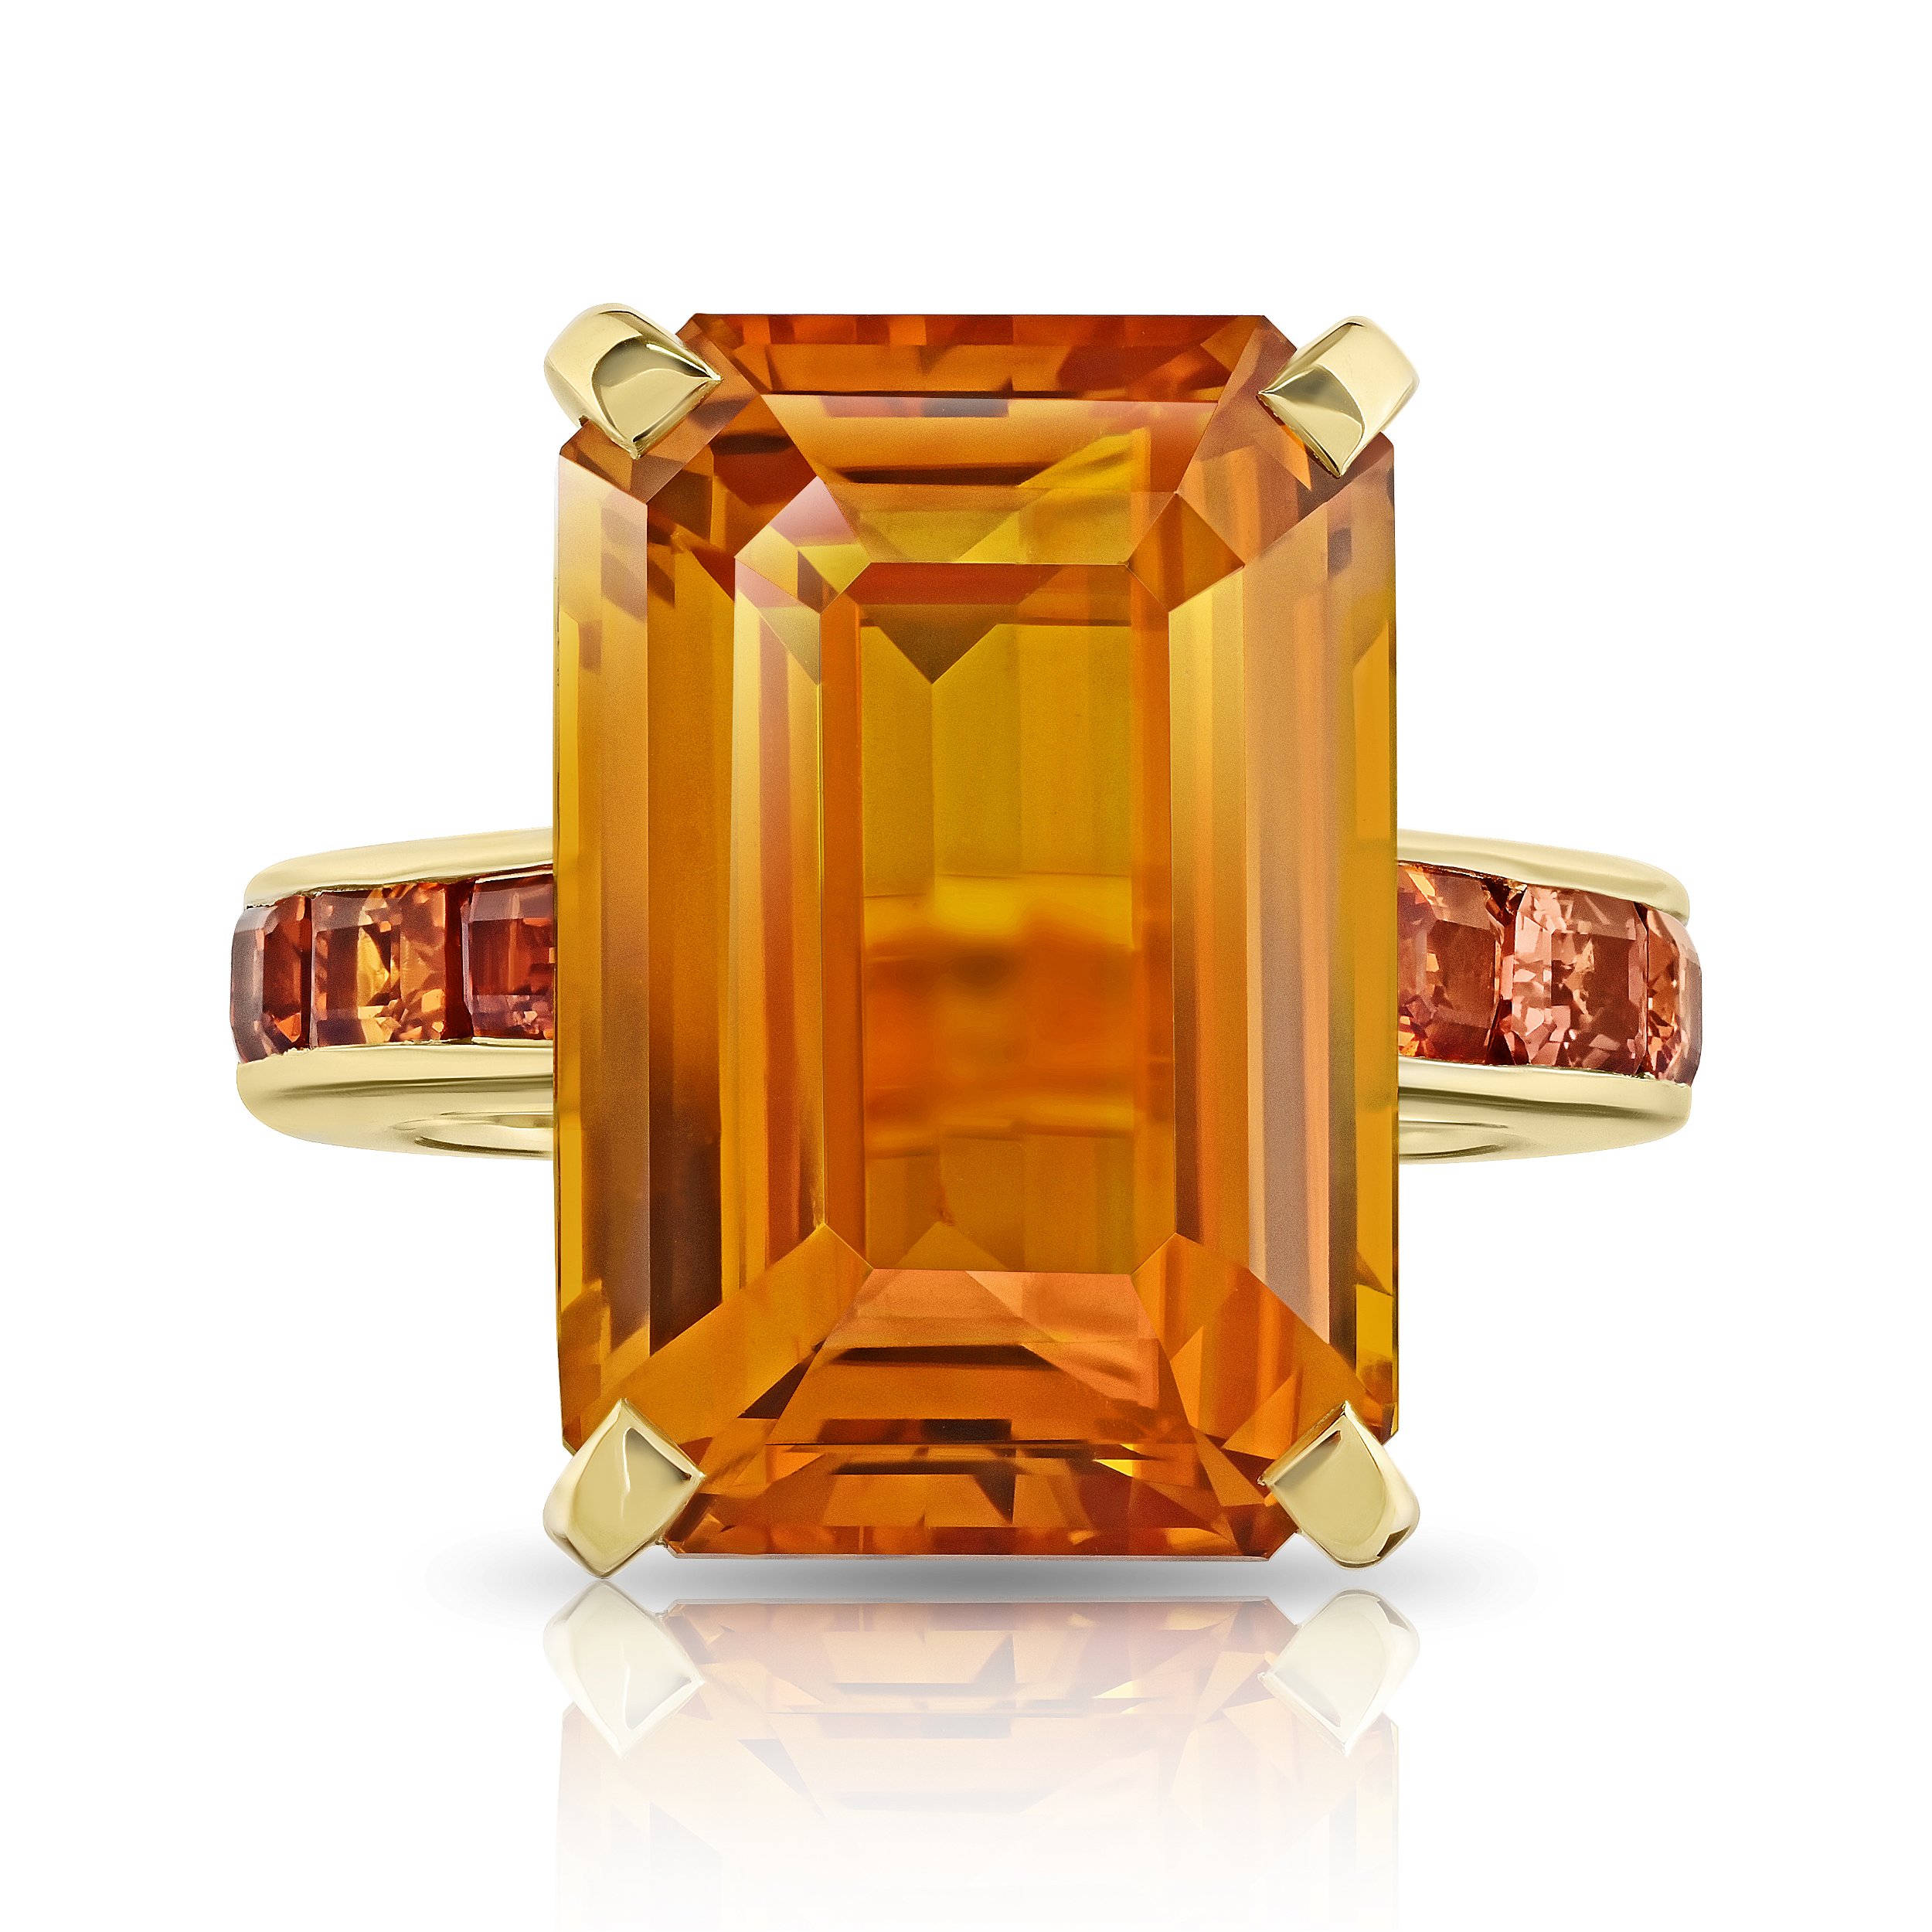 21.05ct Emerald Cut Orange Sapphire with Emerald Cut Sapphire Band in 18kt Yellow Gold